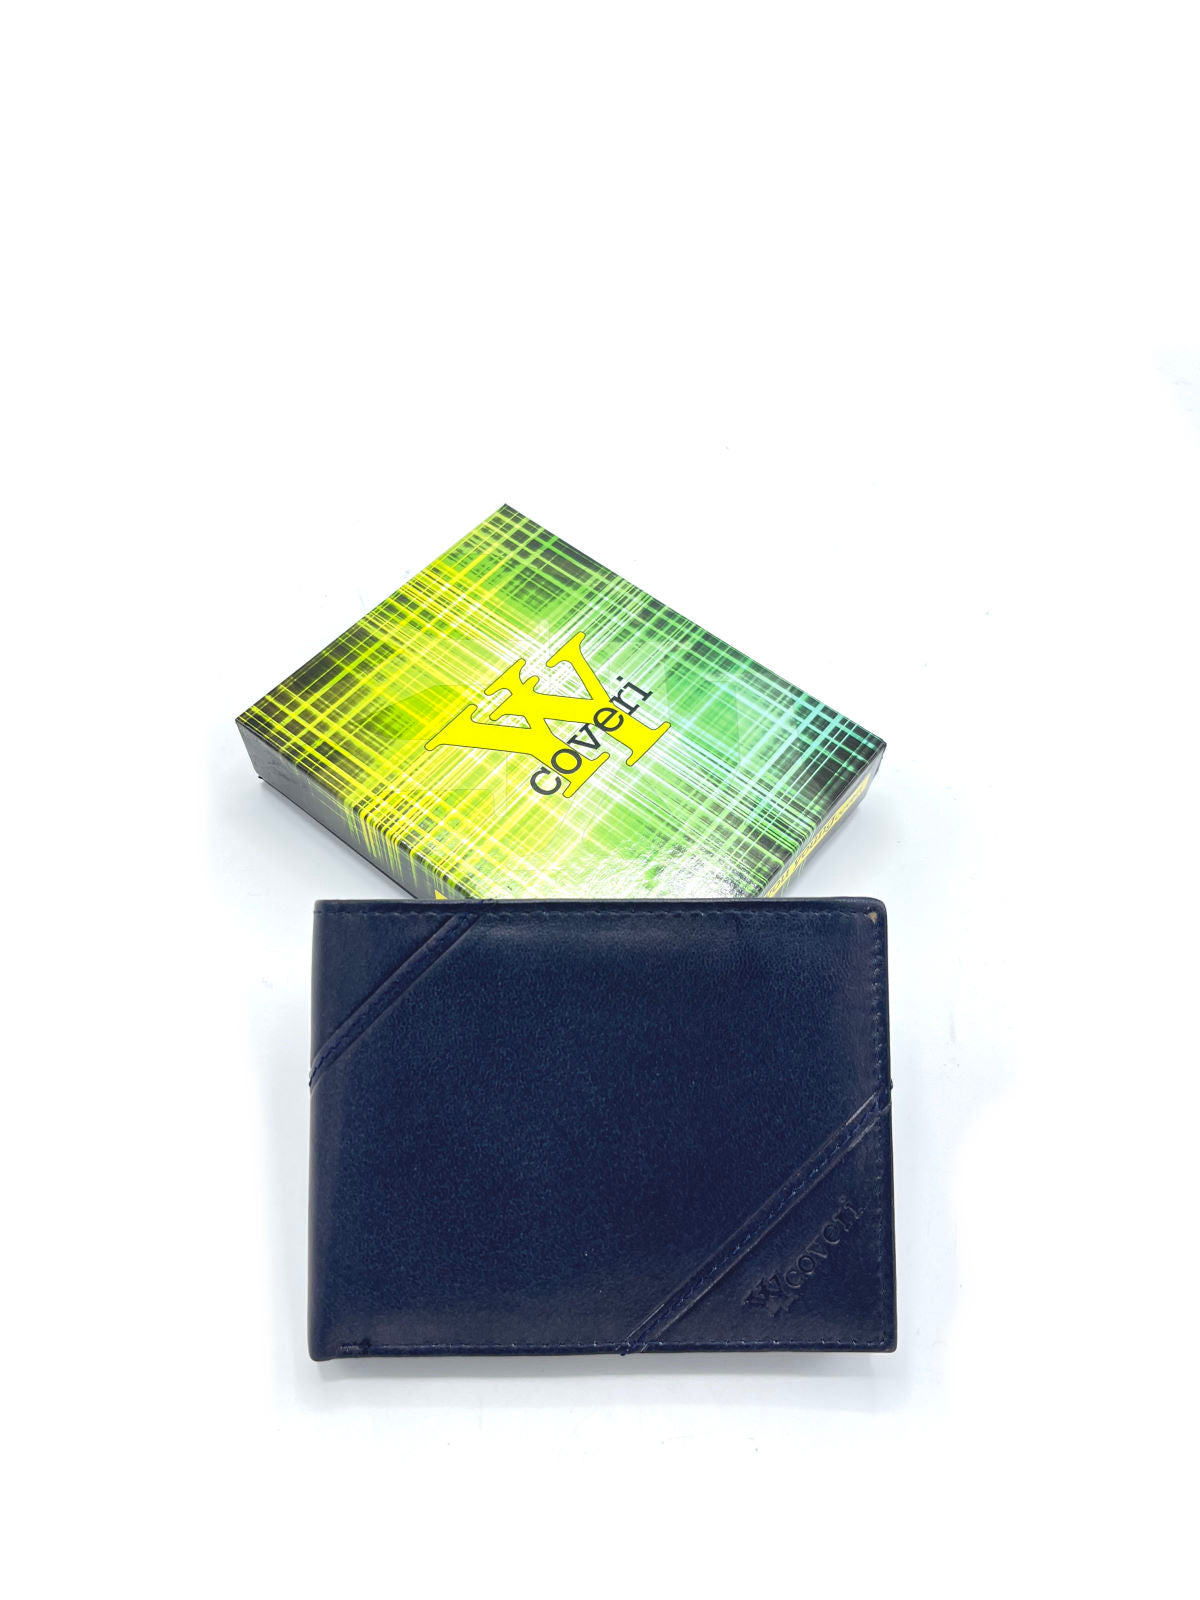 Genuine leather wallet for men, Brand You Young Coveri, art. GINE1161.422